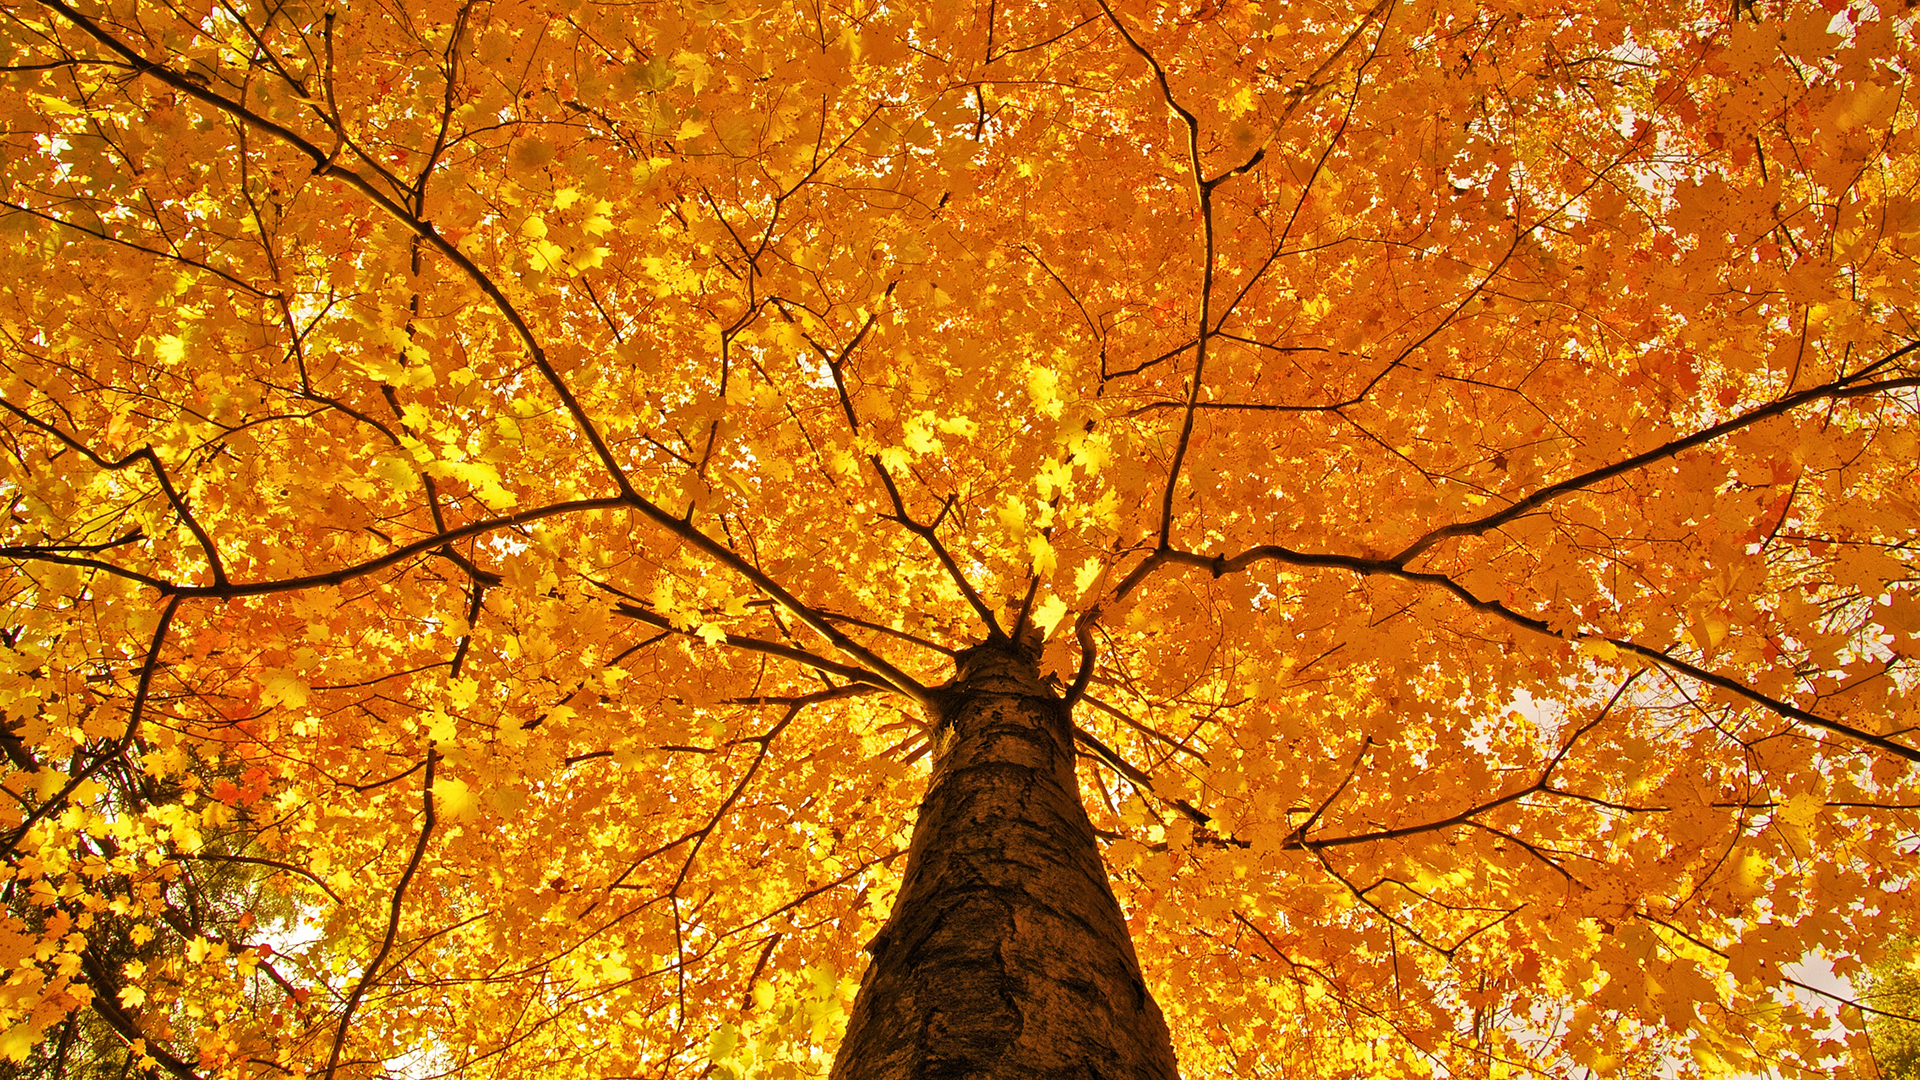 Fall Foliage Backgrounds Free Download - Worms Eye View Trees - HD Wallpaper 